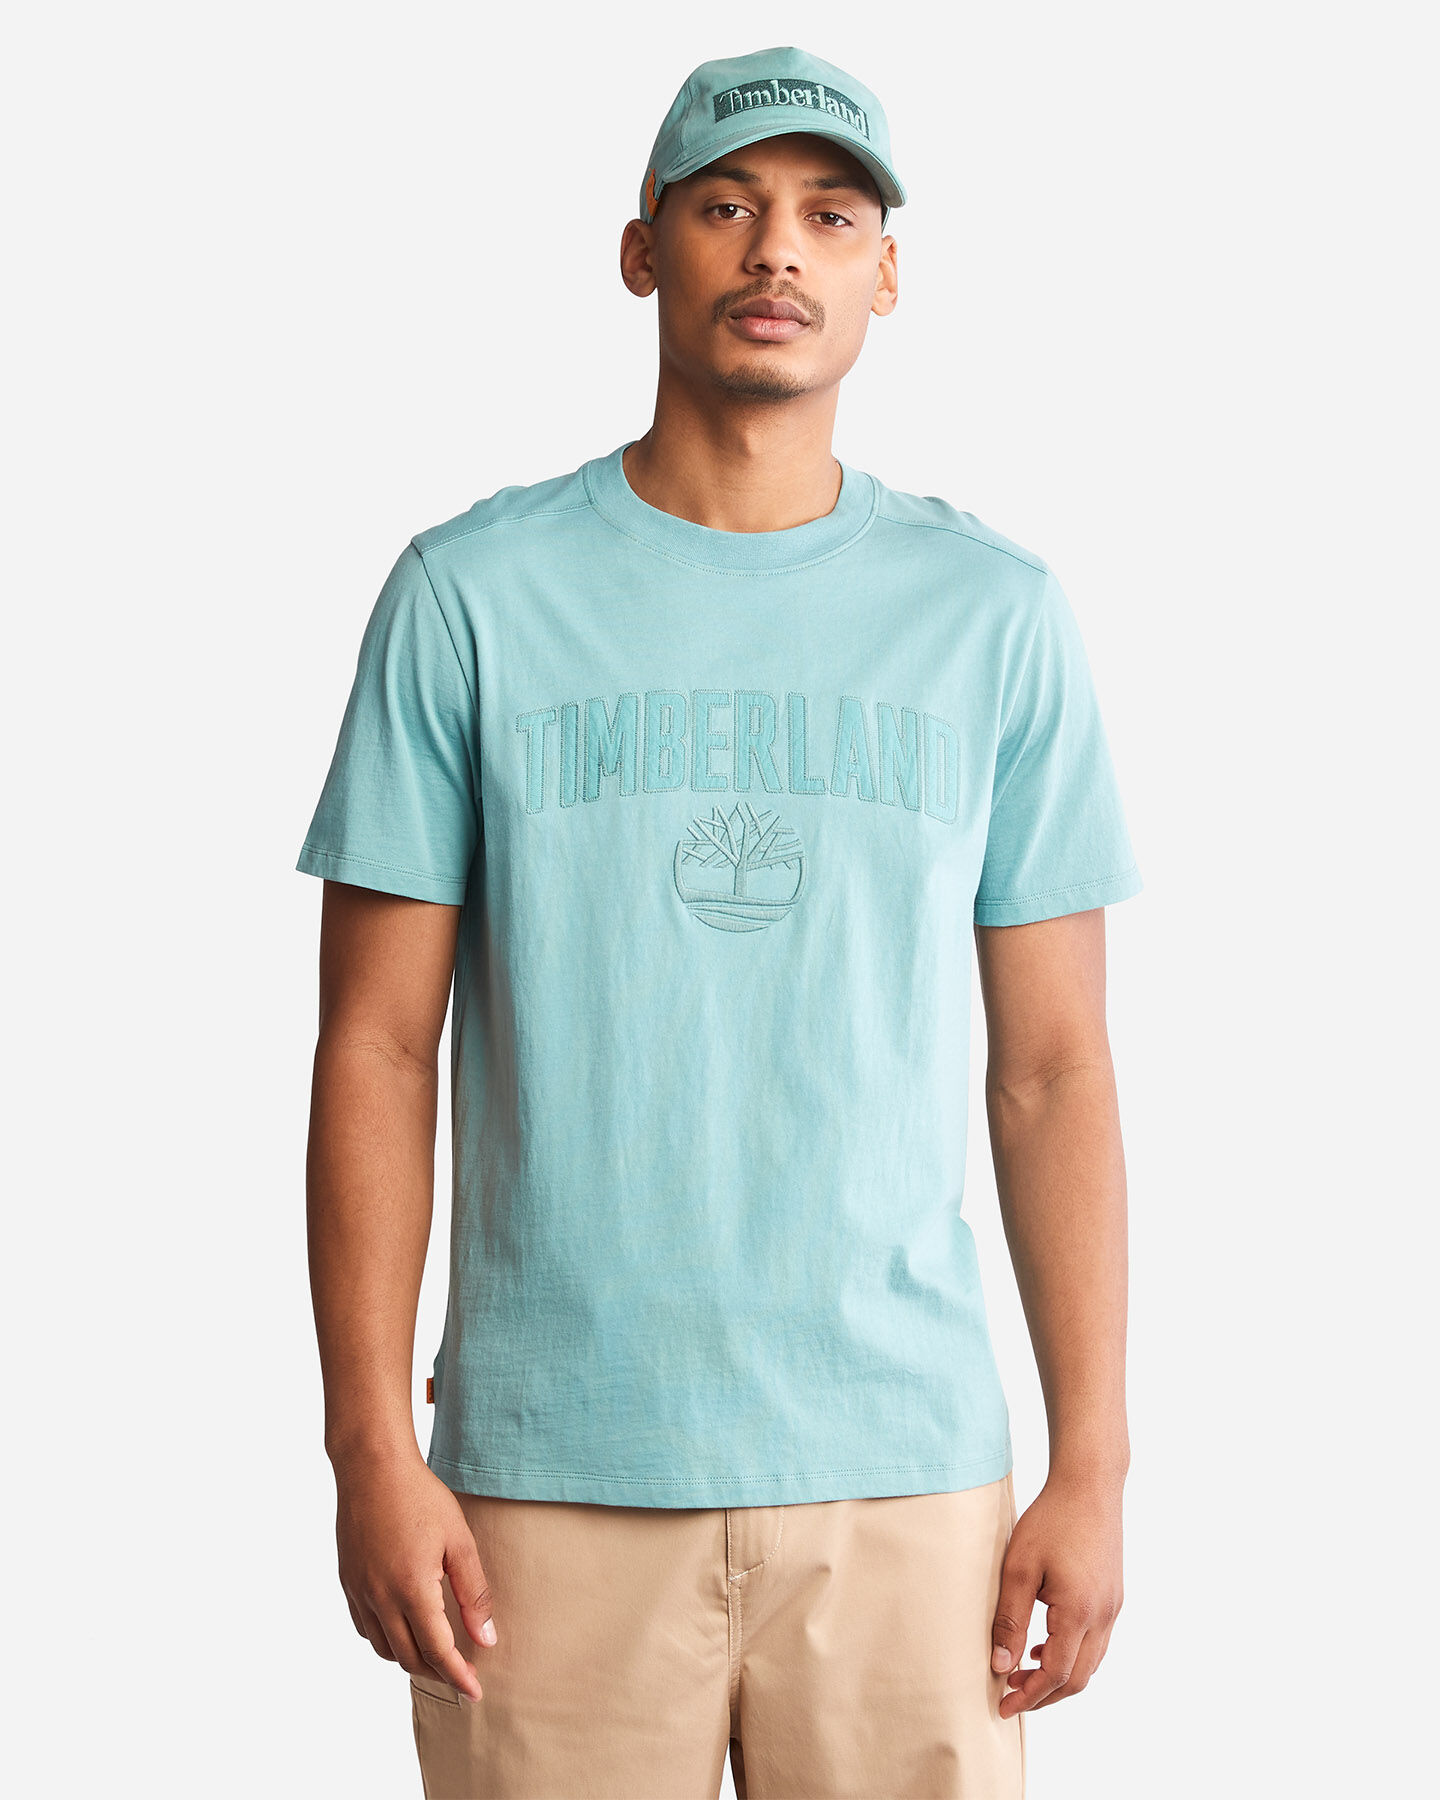  T-Shirt TIMBERLAND HERITAGE EK+ ALWAYS ON M S4104758|G991|S scatto 0